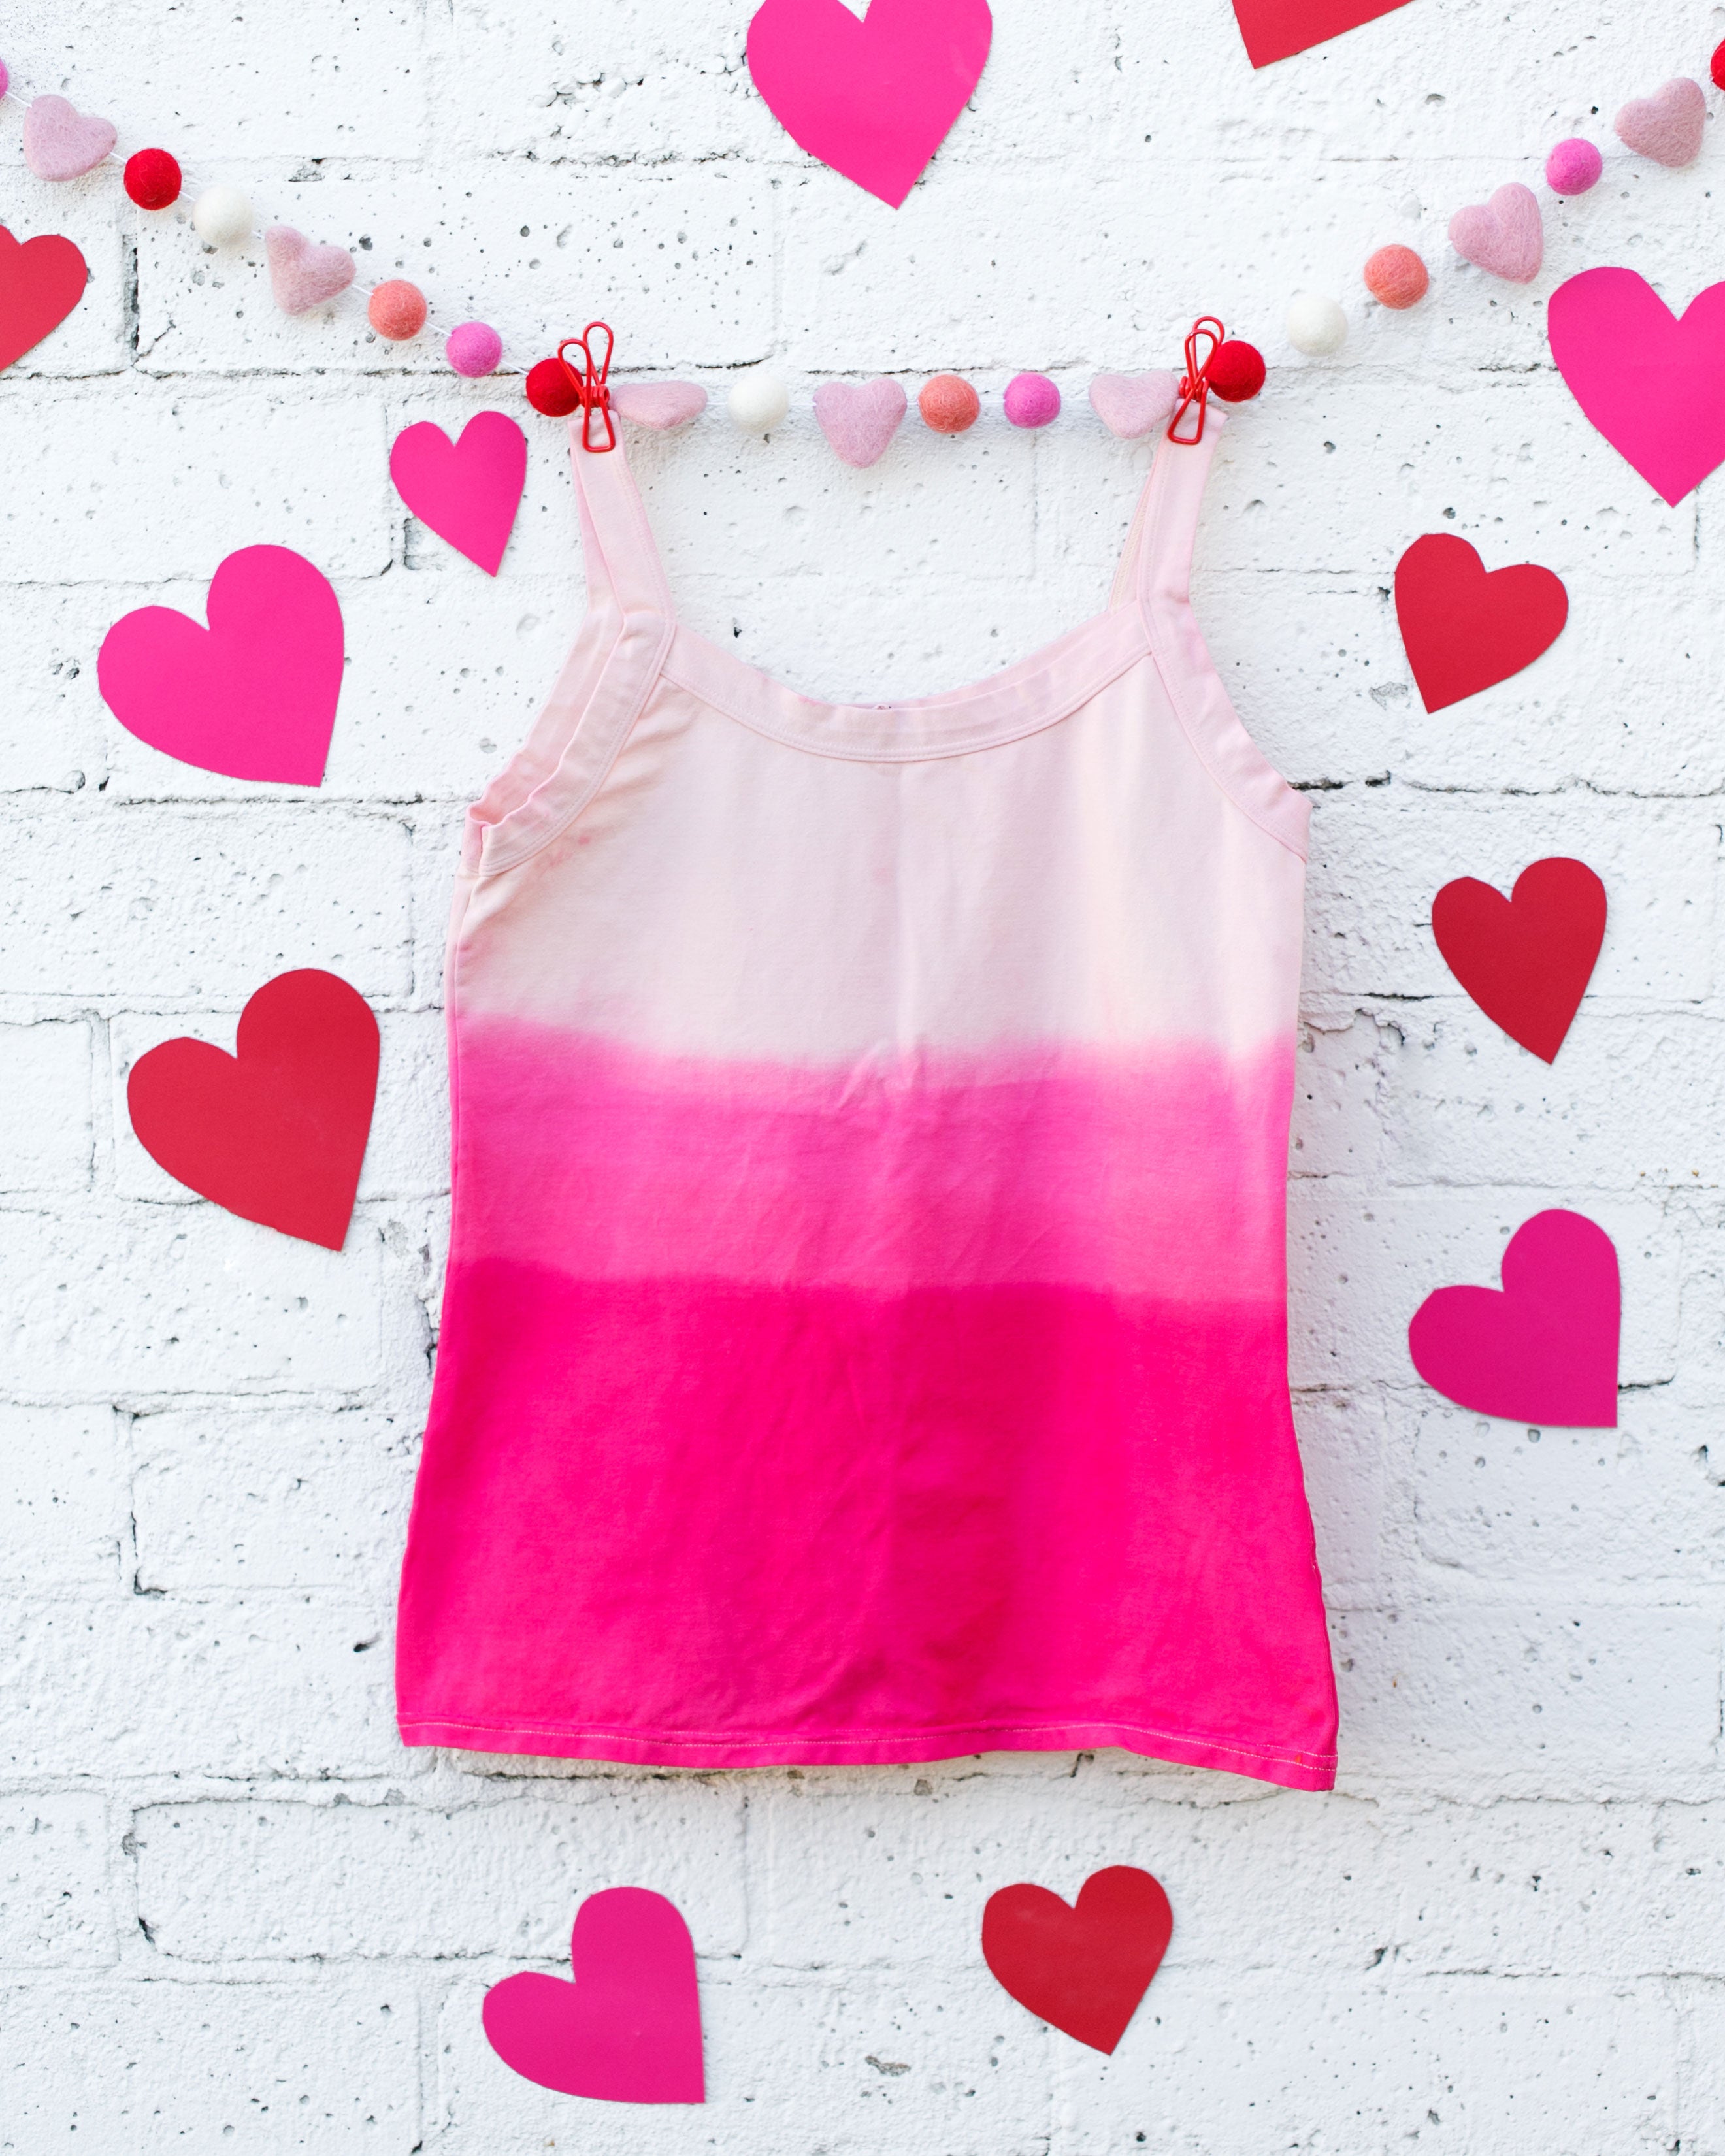 Photo of Thunderpants organic cotton Camisole in Valentine's Day Dip Dye ombre pinks with hearts around.